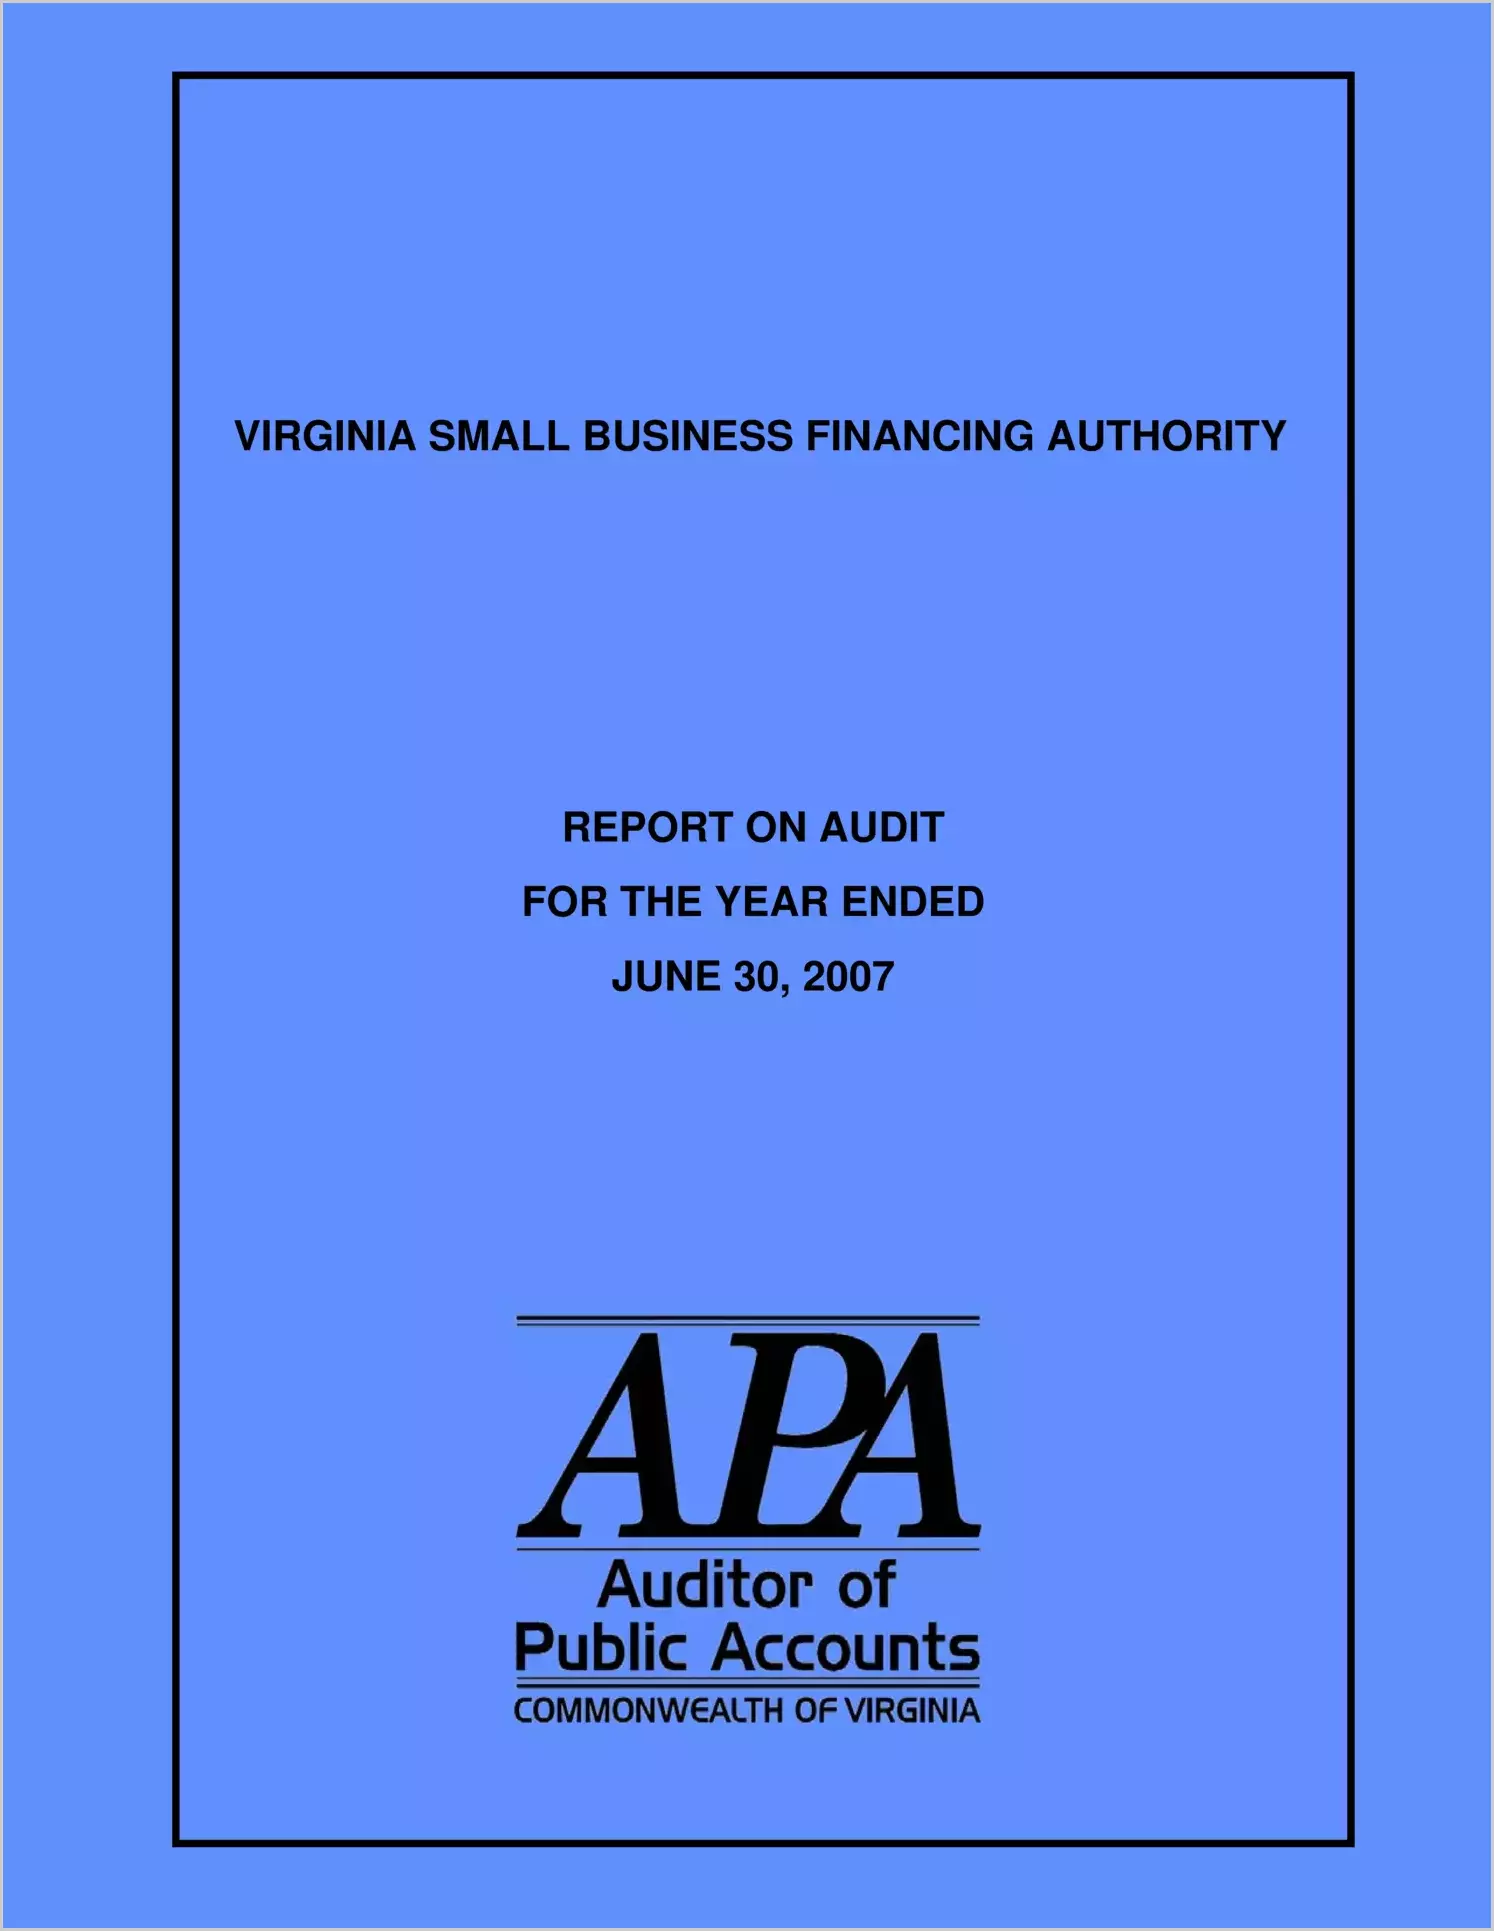 Virginia Small Business Financing Authority for the year ended June 30, 2006